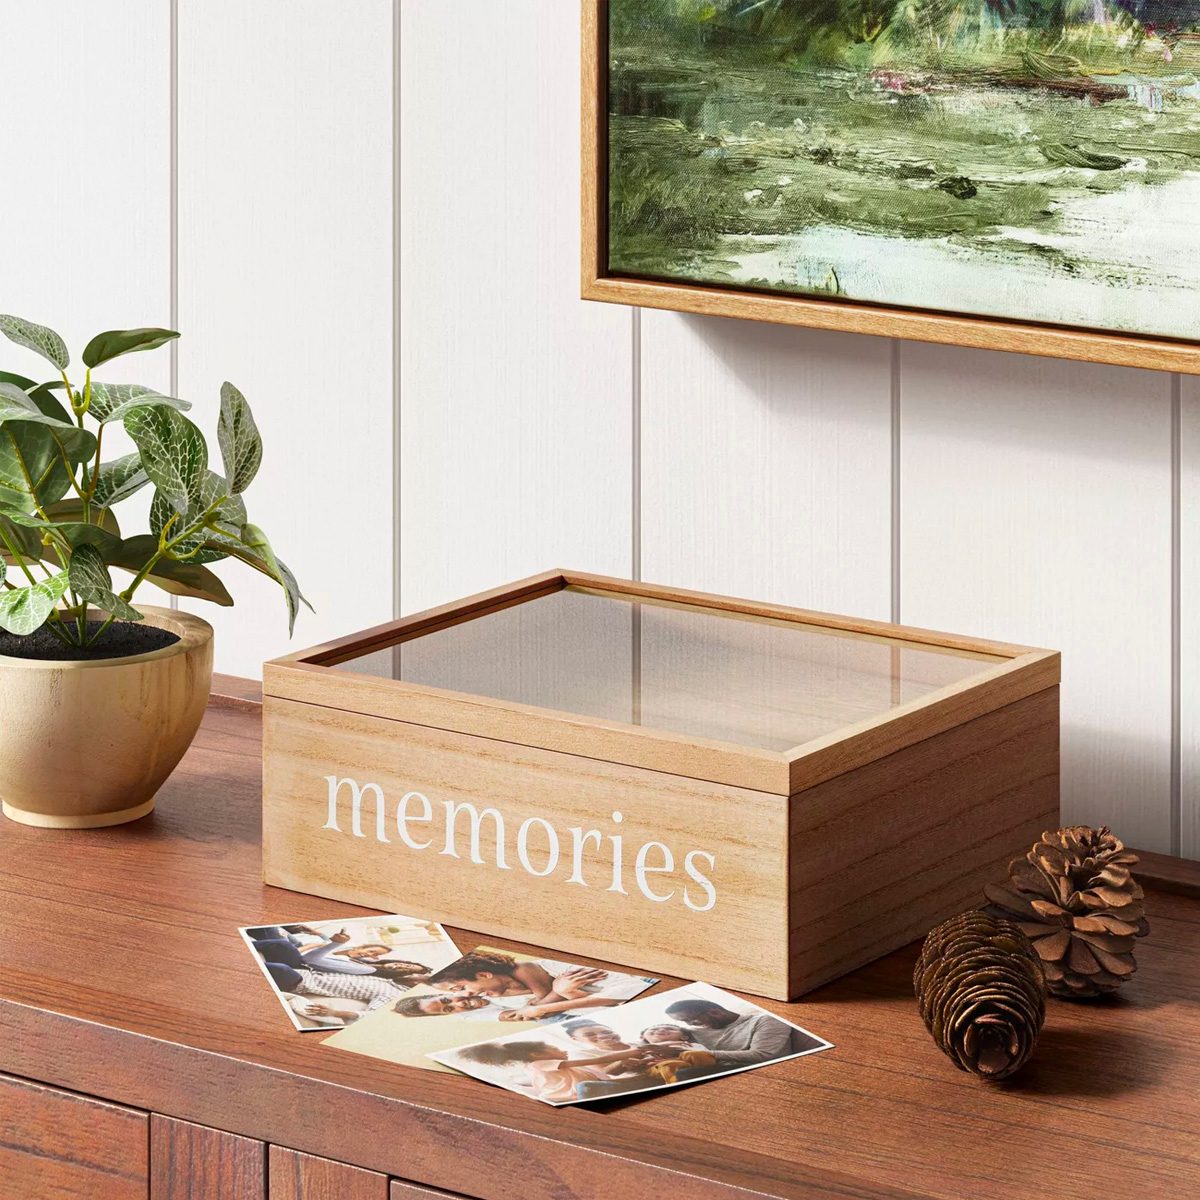 Personalized Wooden Photo Box in Vintage Style for Photo Storage